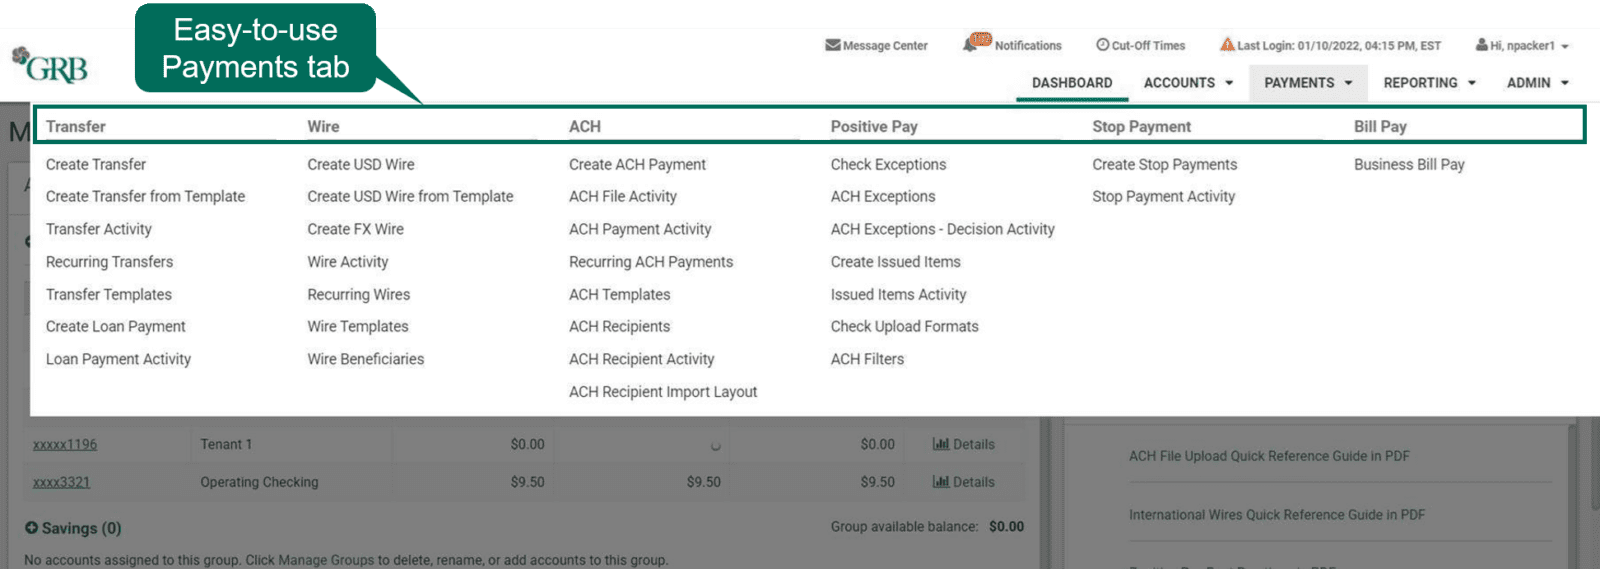 Payments tab on the new Treasury Management platform